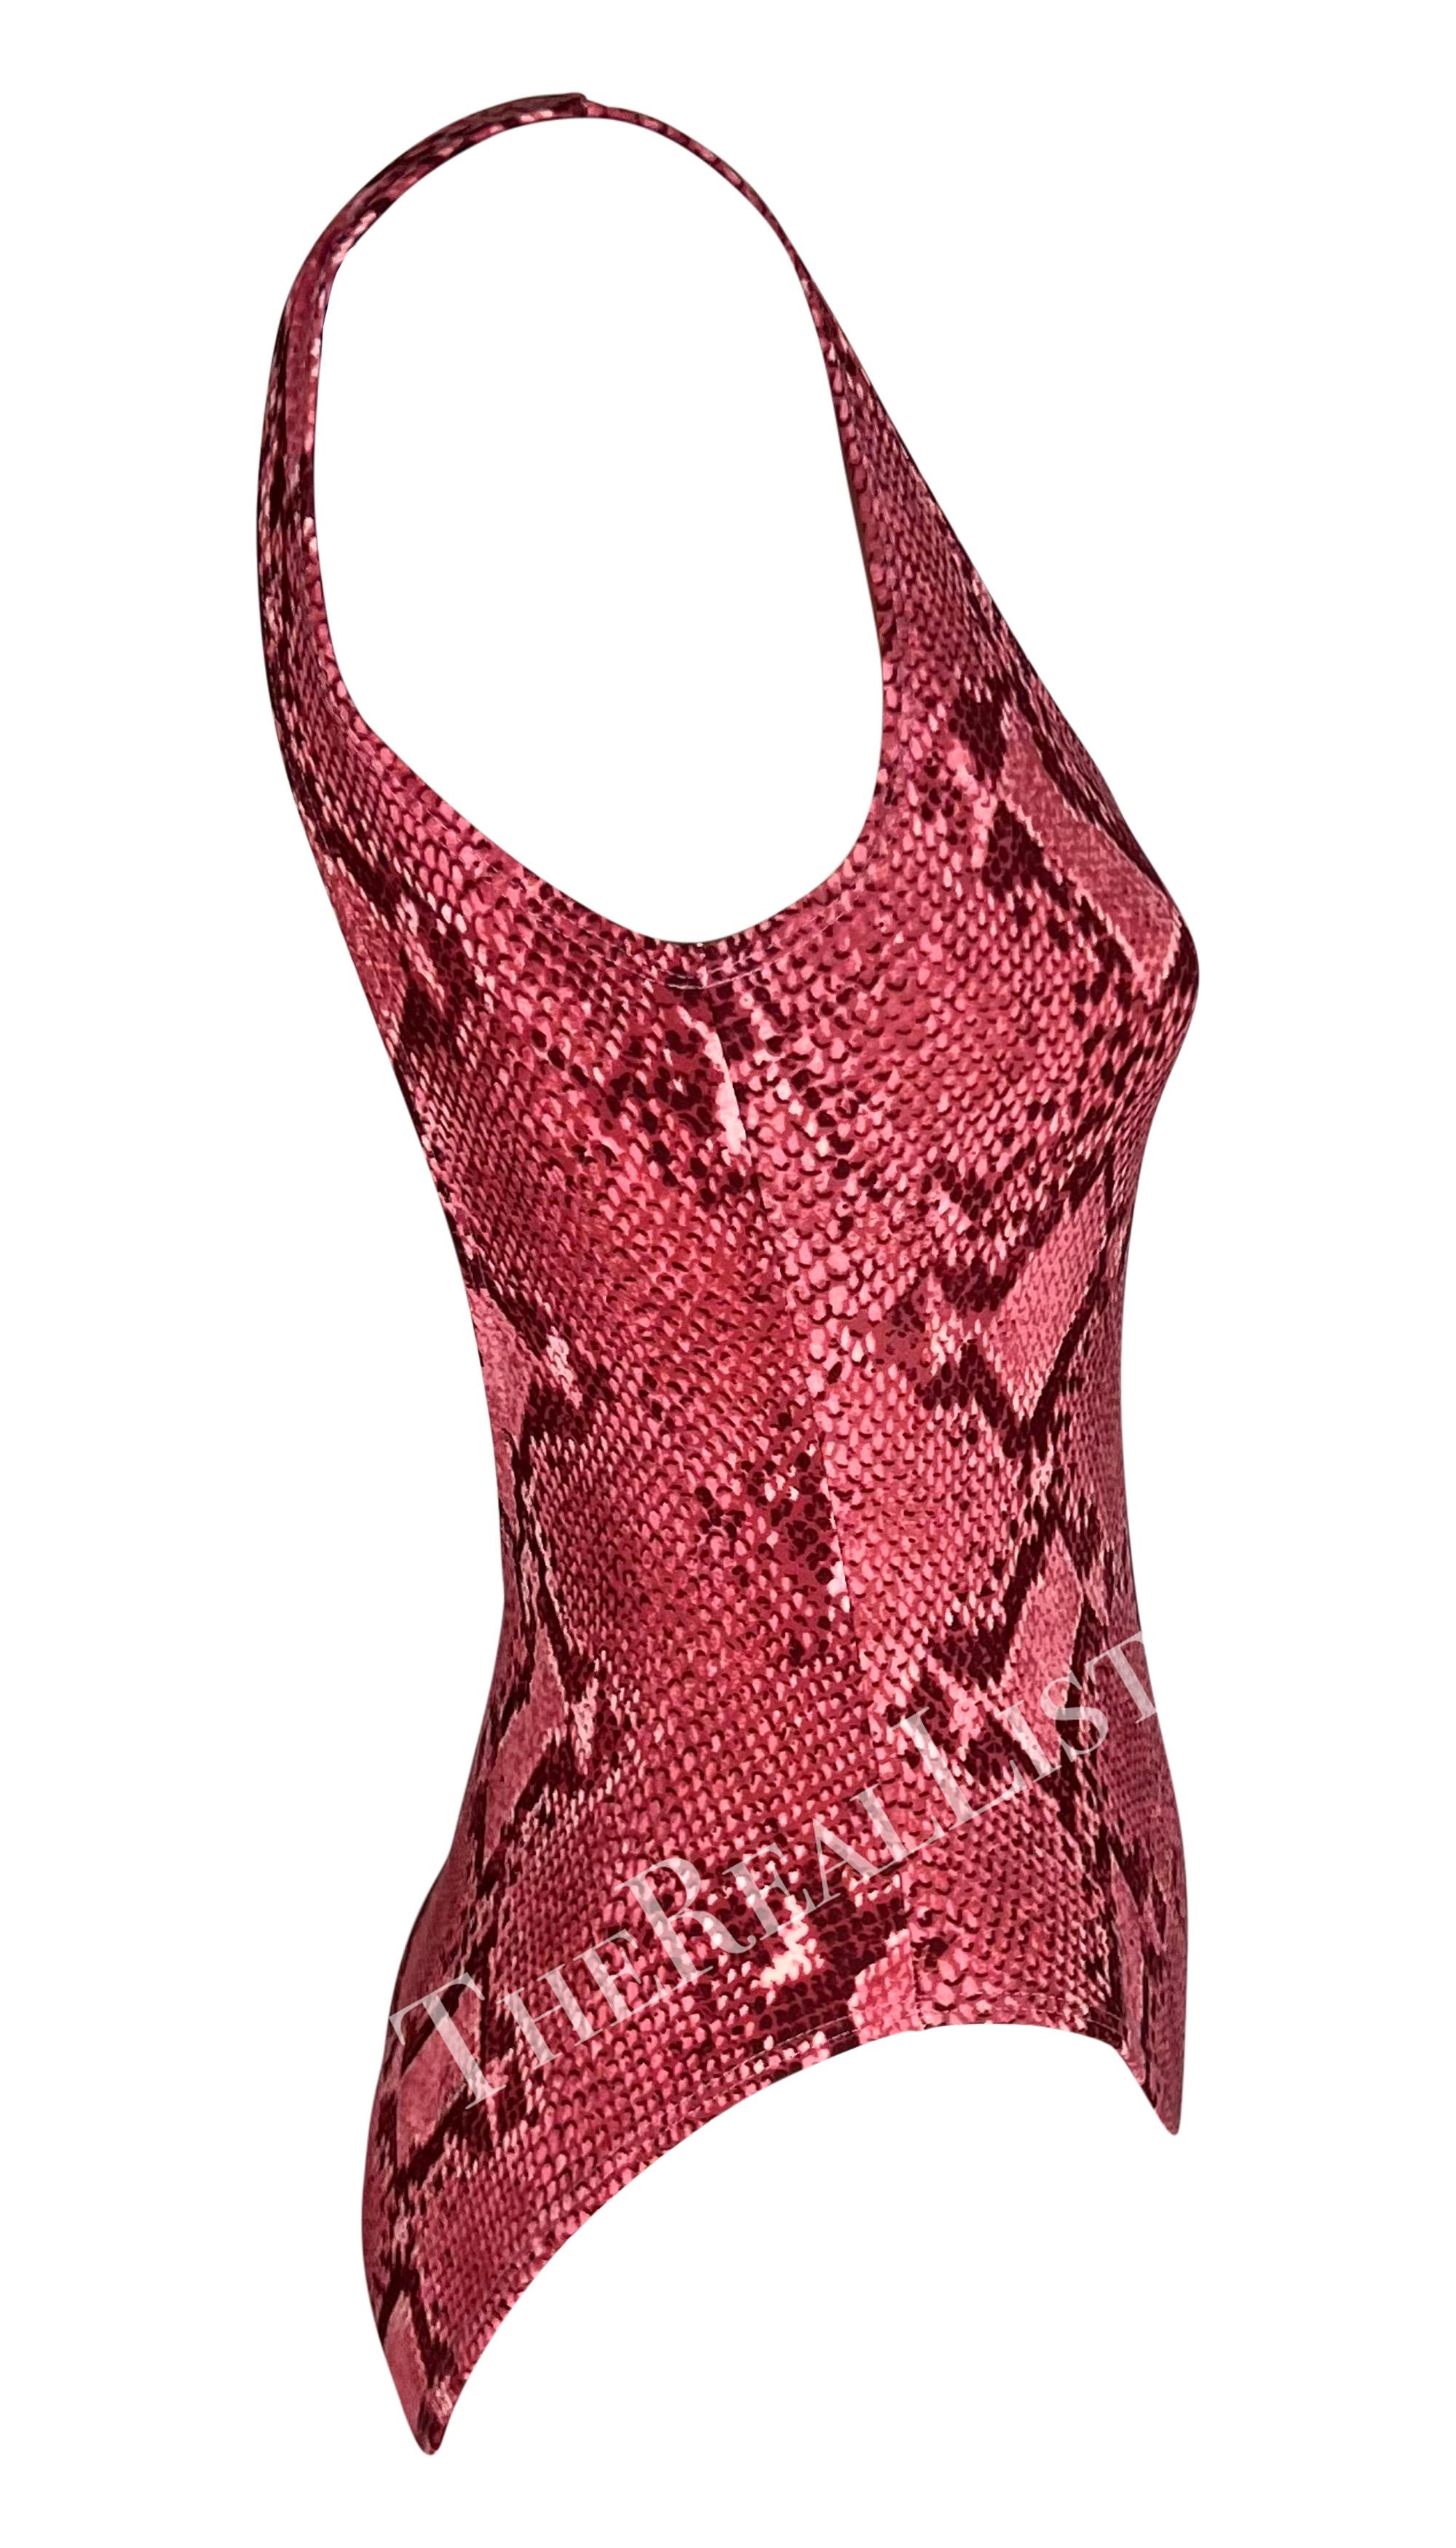 S/S 2000 Gucci by Tom Ford Pink Snakeskin Print One Piece Swimsuit Bodysuit For Sale 2